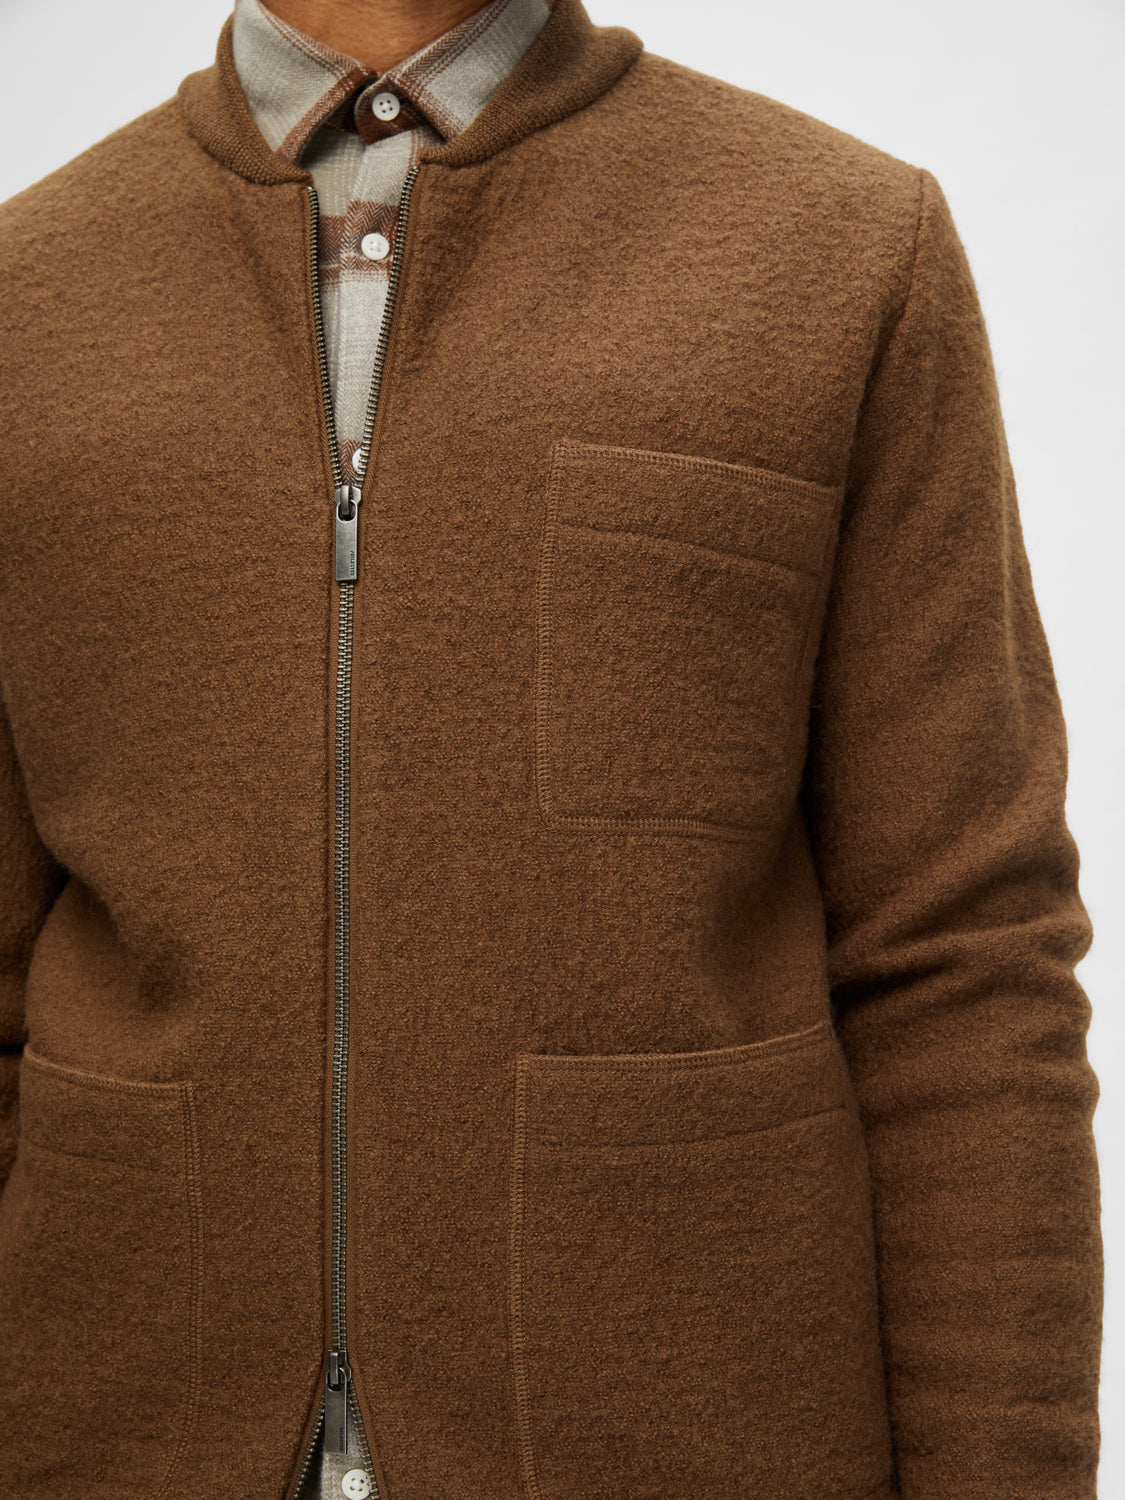 SELECTED HOMME - NEALY Cardigan - Coffee Lique�r